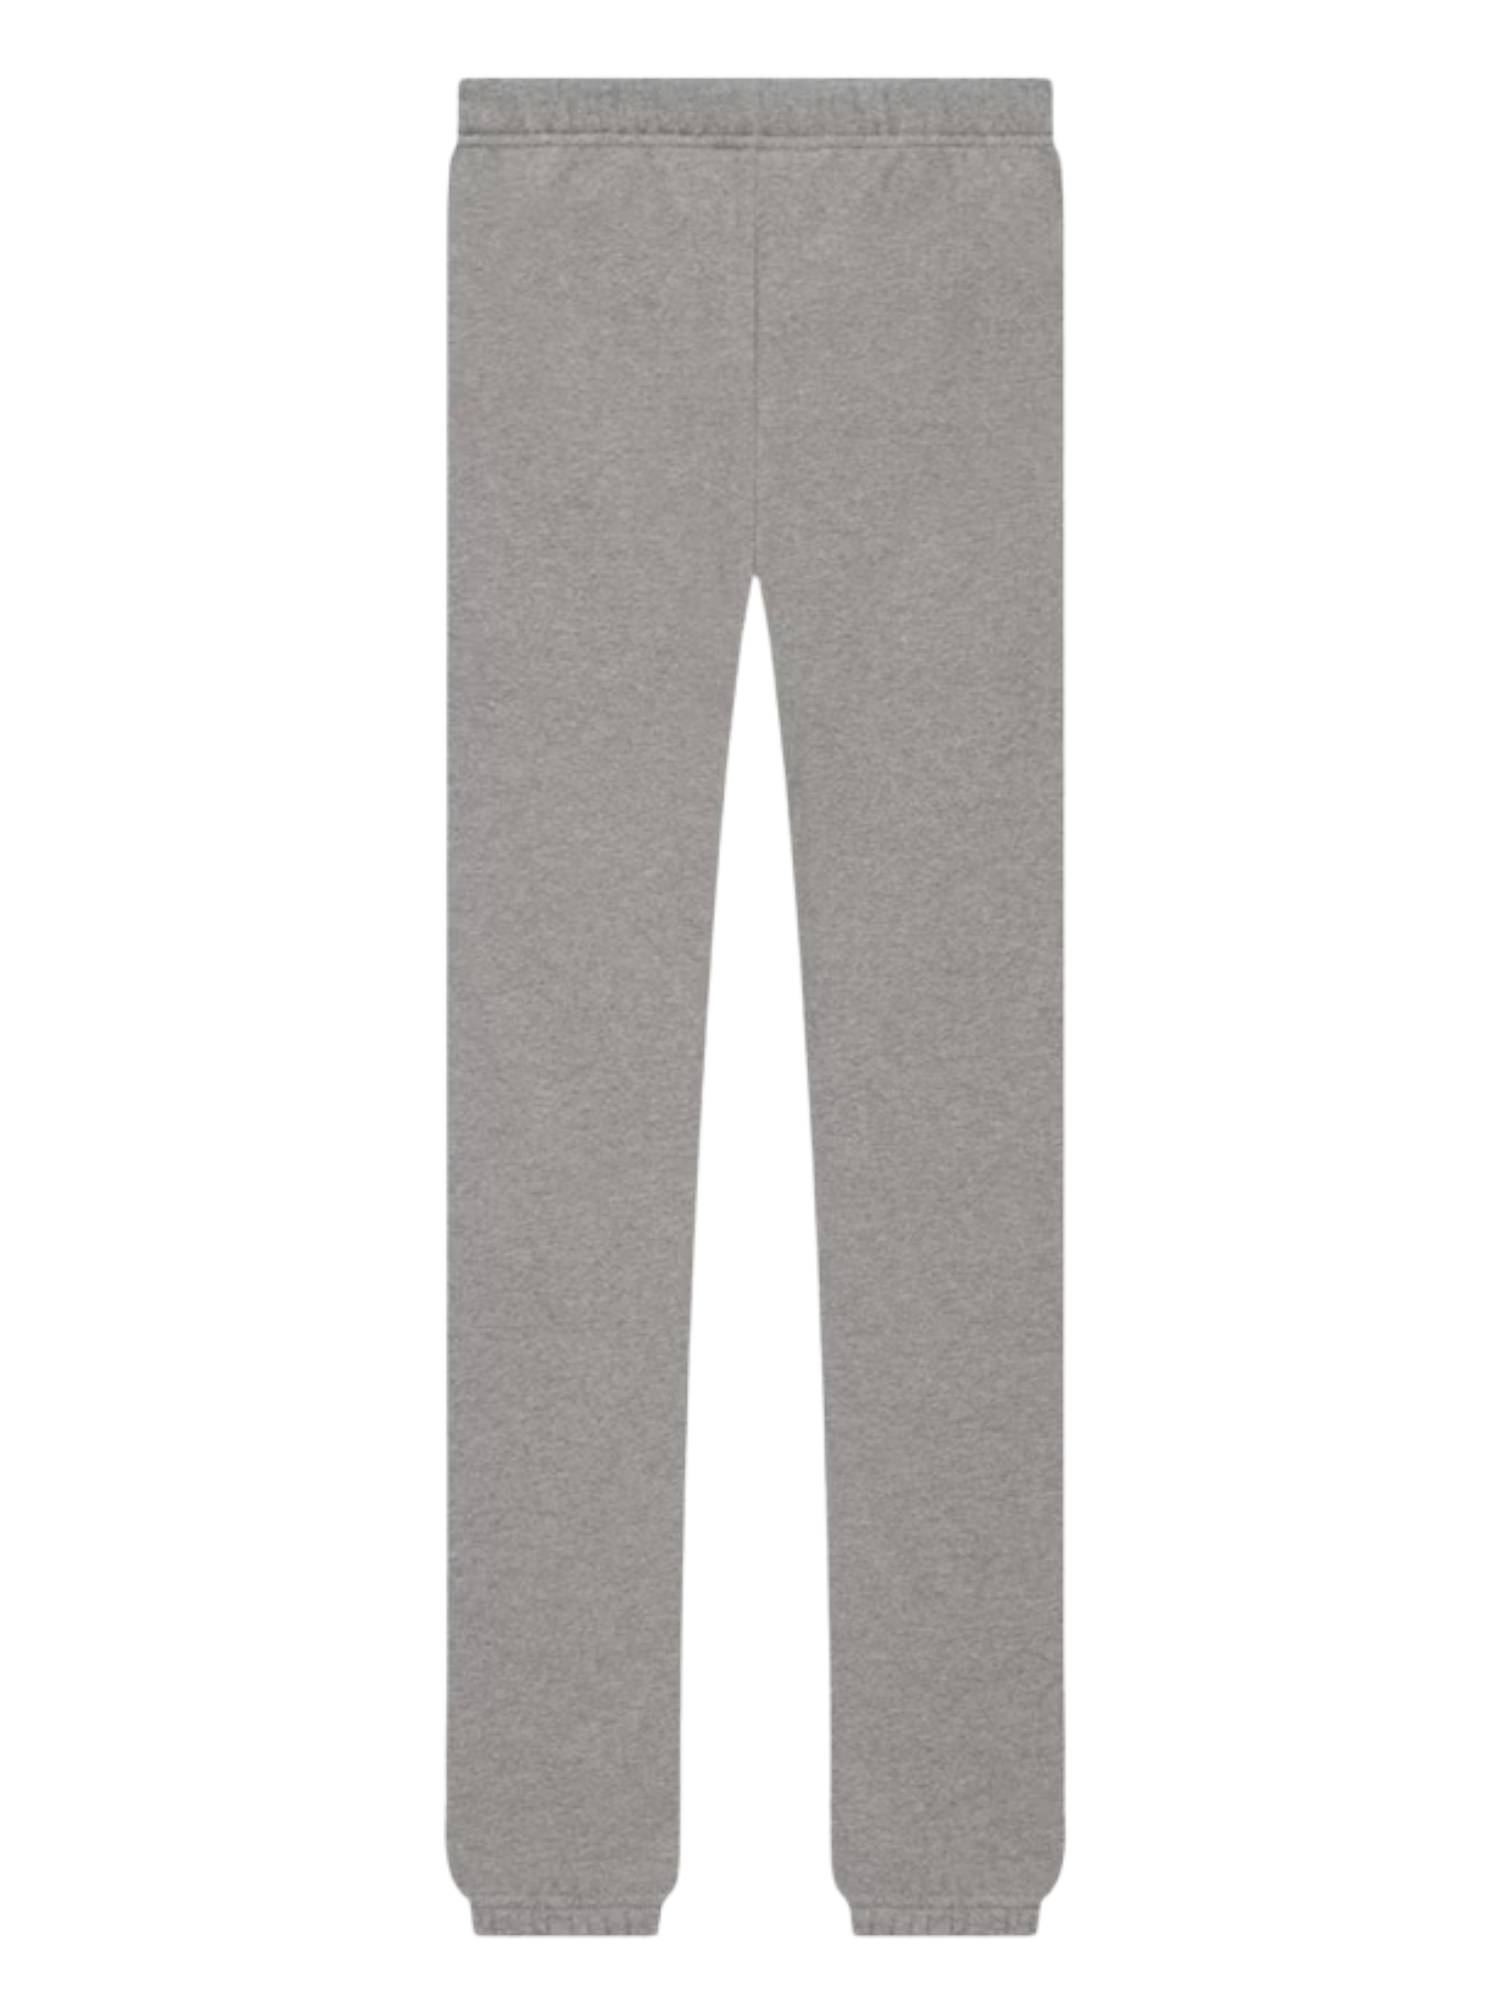 Essentials Fear of God Dark Heather Oatmeal Fleece Sweatpants SS22 — Genuine Design Luxury Consignment Calgary, Alberta, Canada New & Pre-Owned Clothing, Shoes, Accessories.